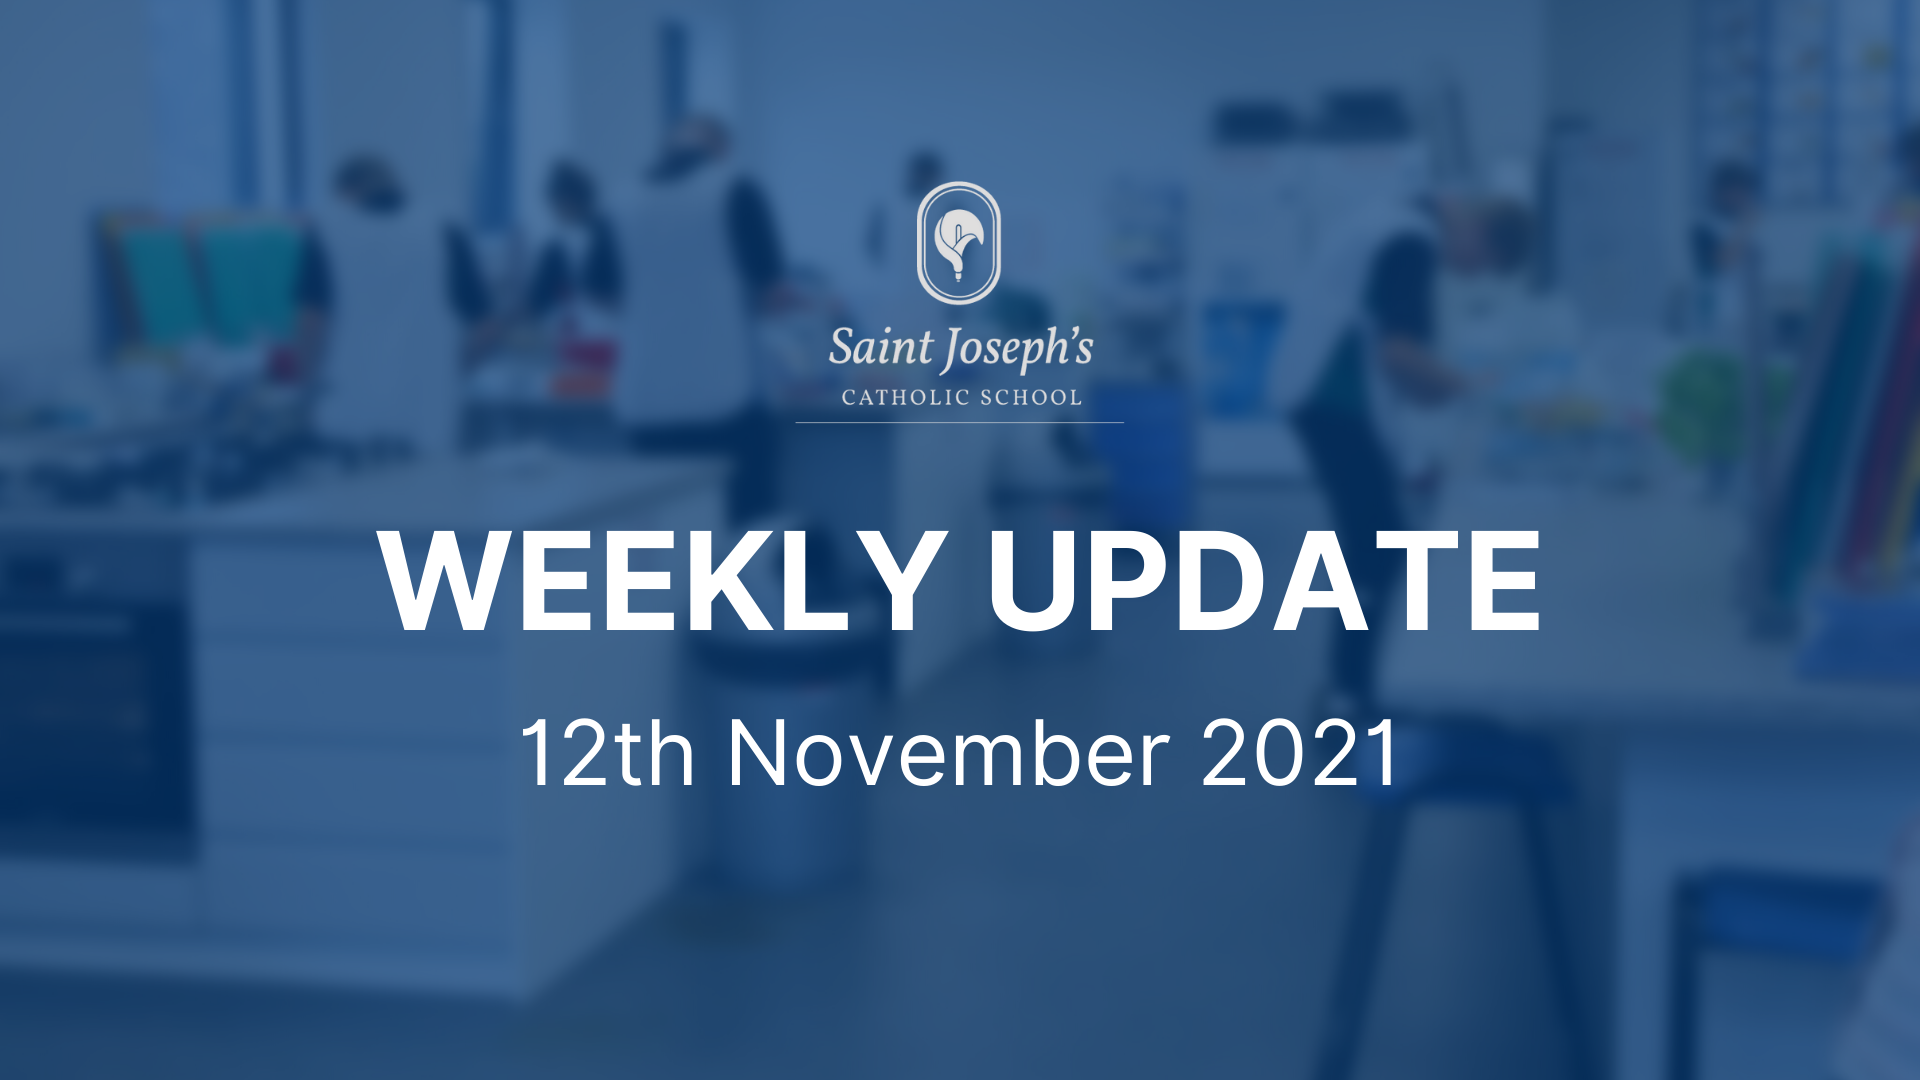 Featured image for “Weekly Update: 12th November 2021”